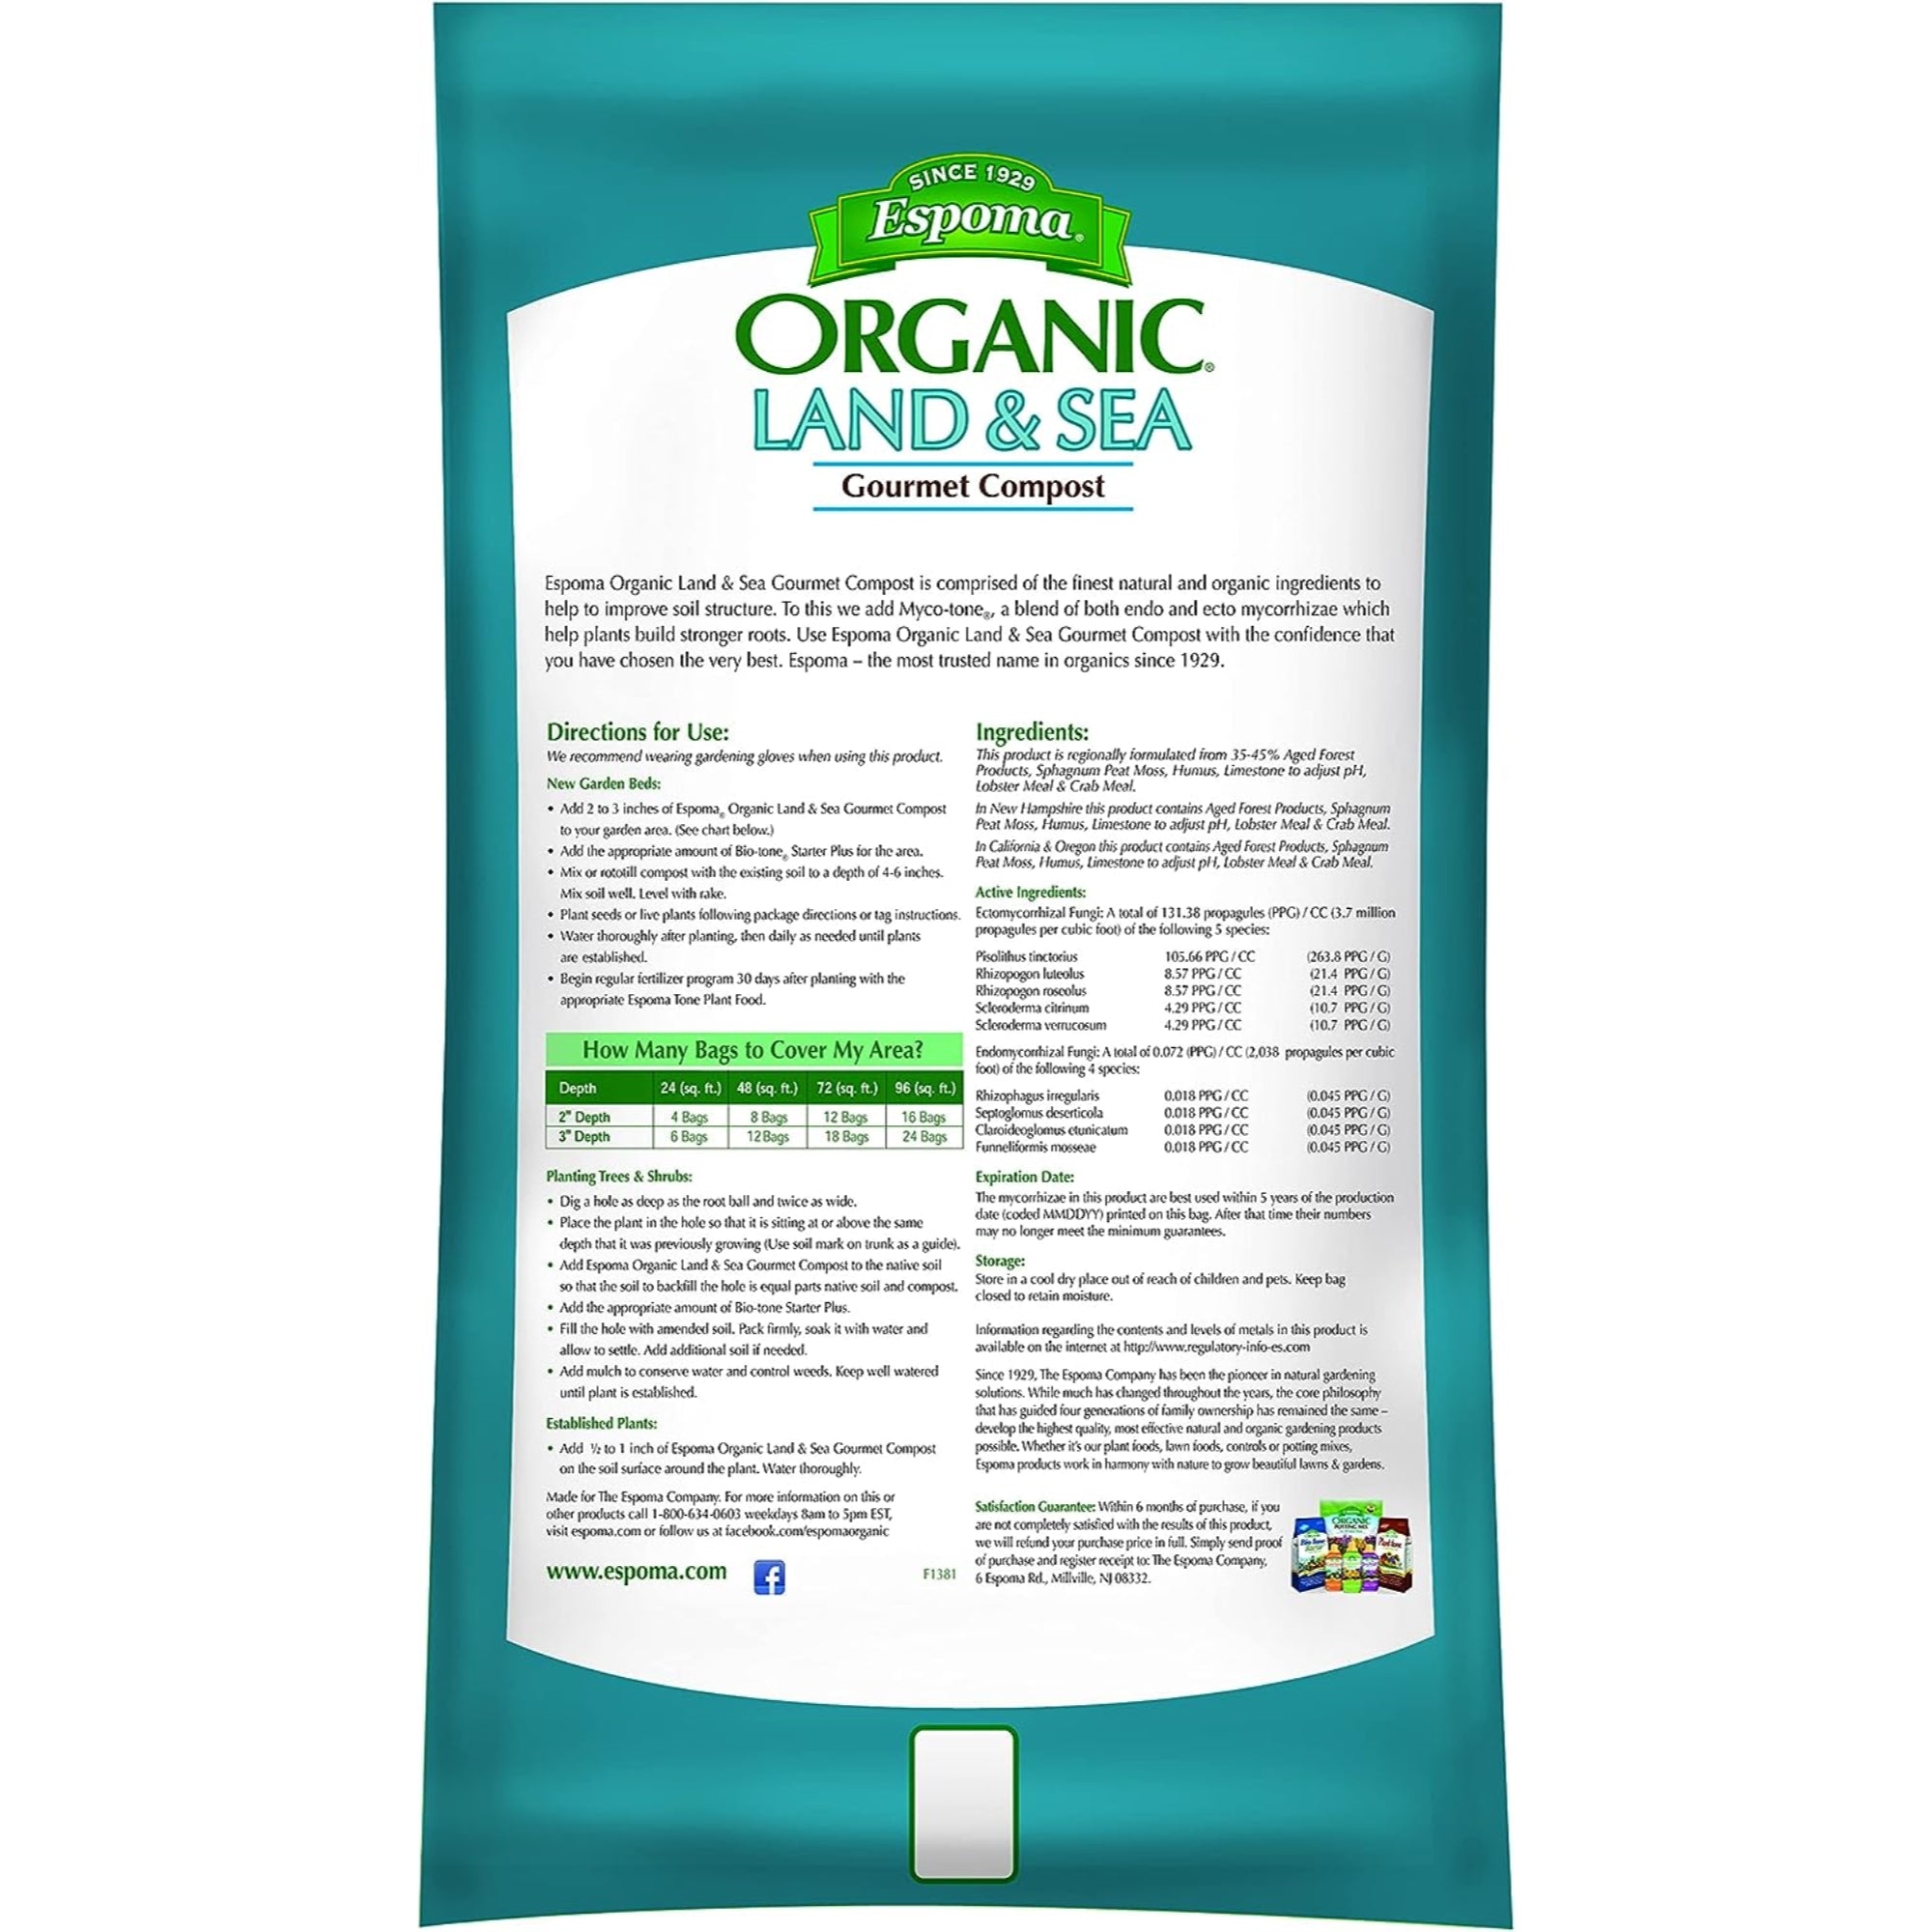 Espoma Land & Sea Gourmet Compost for Organic Gardening, Contains Lobster & Crab Meal, 1 CF Bag